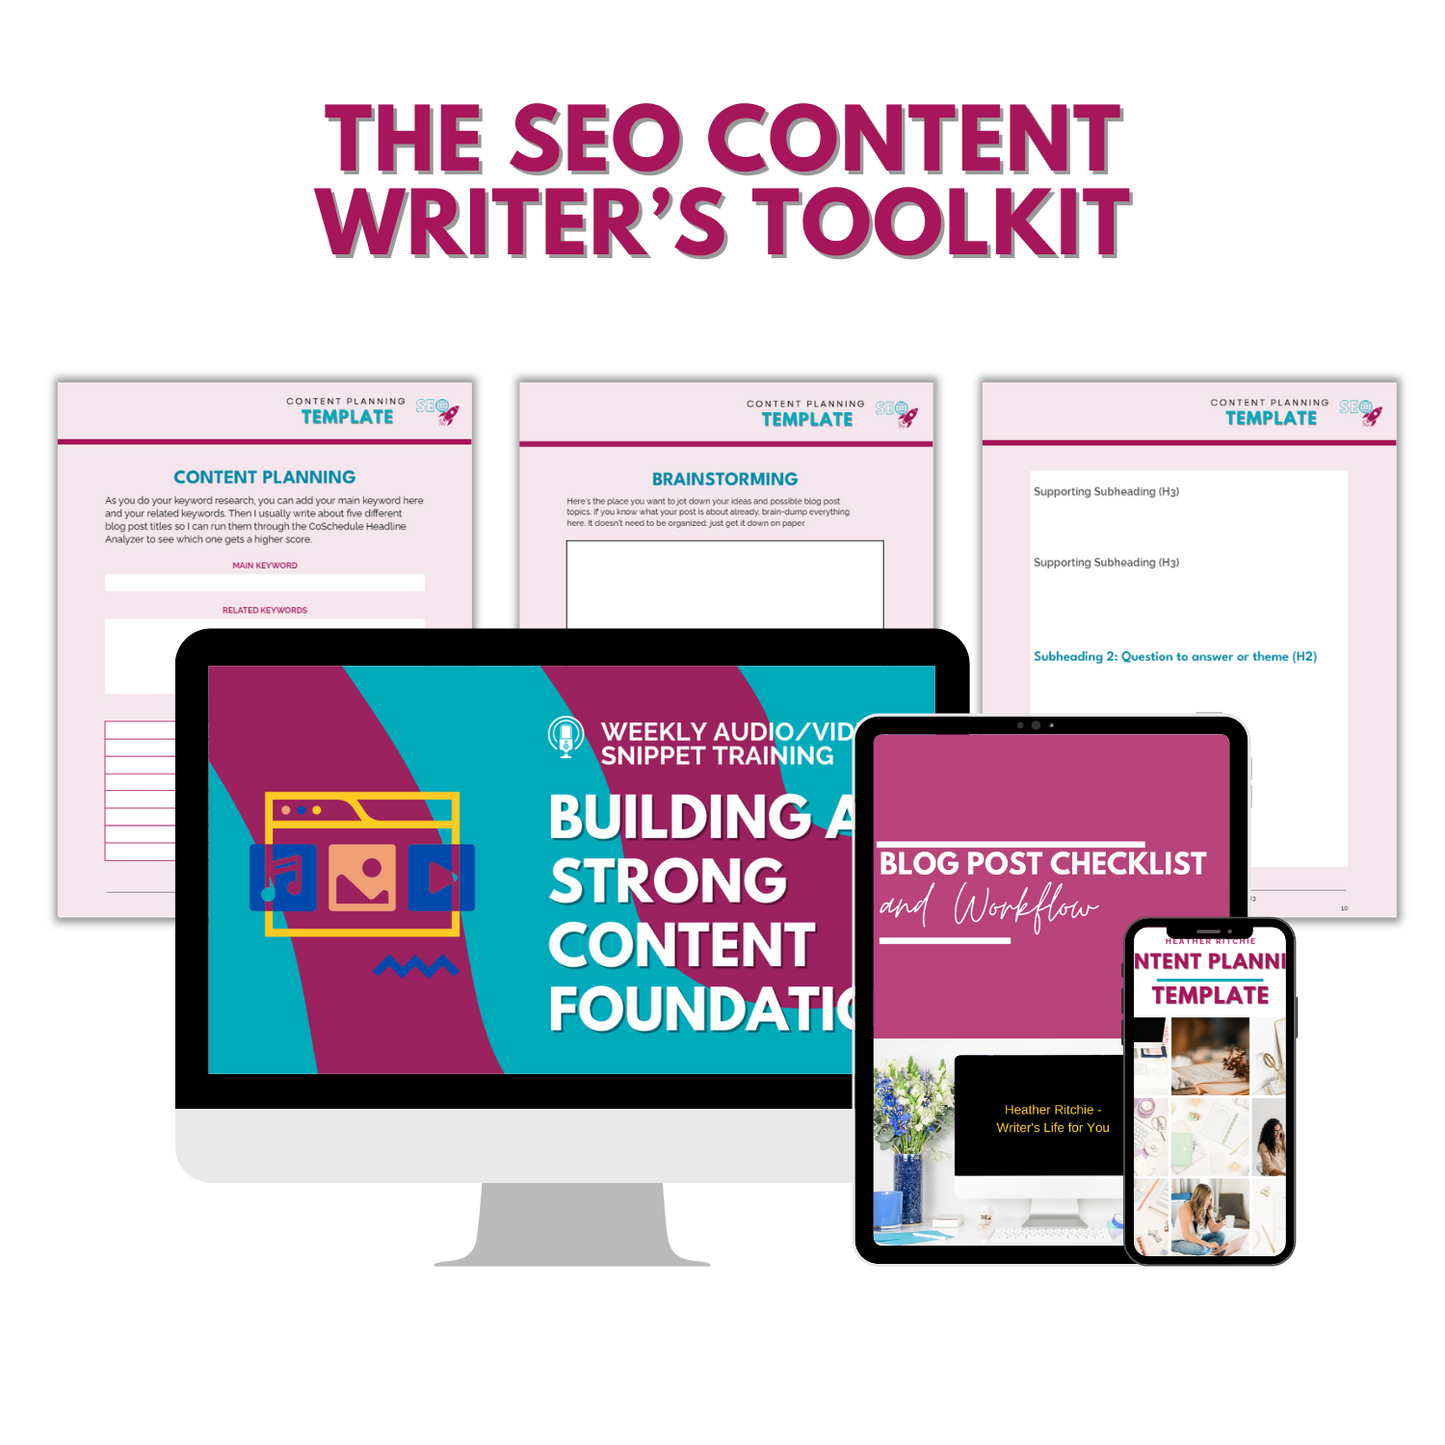 The SEO Content Writer's Toolkit